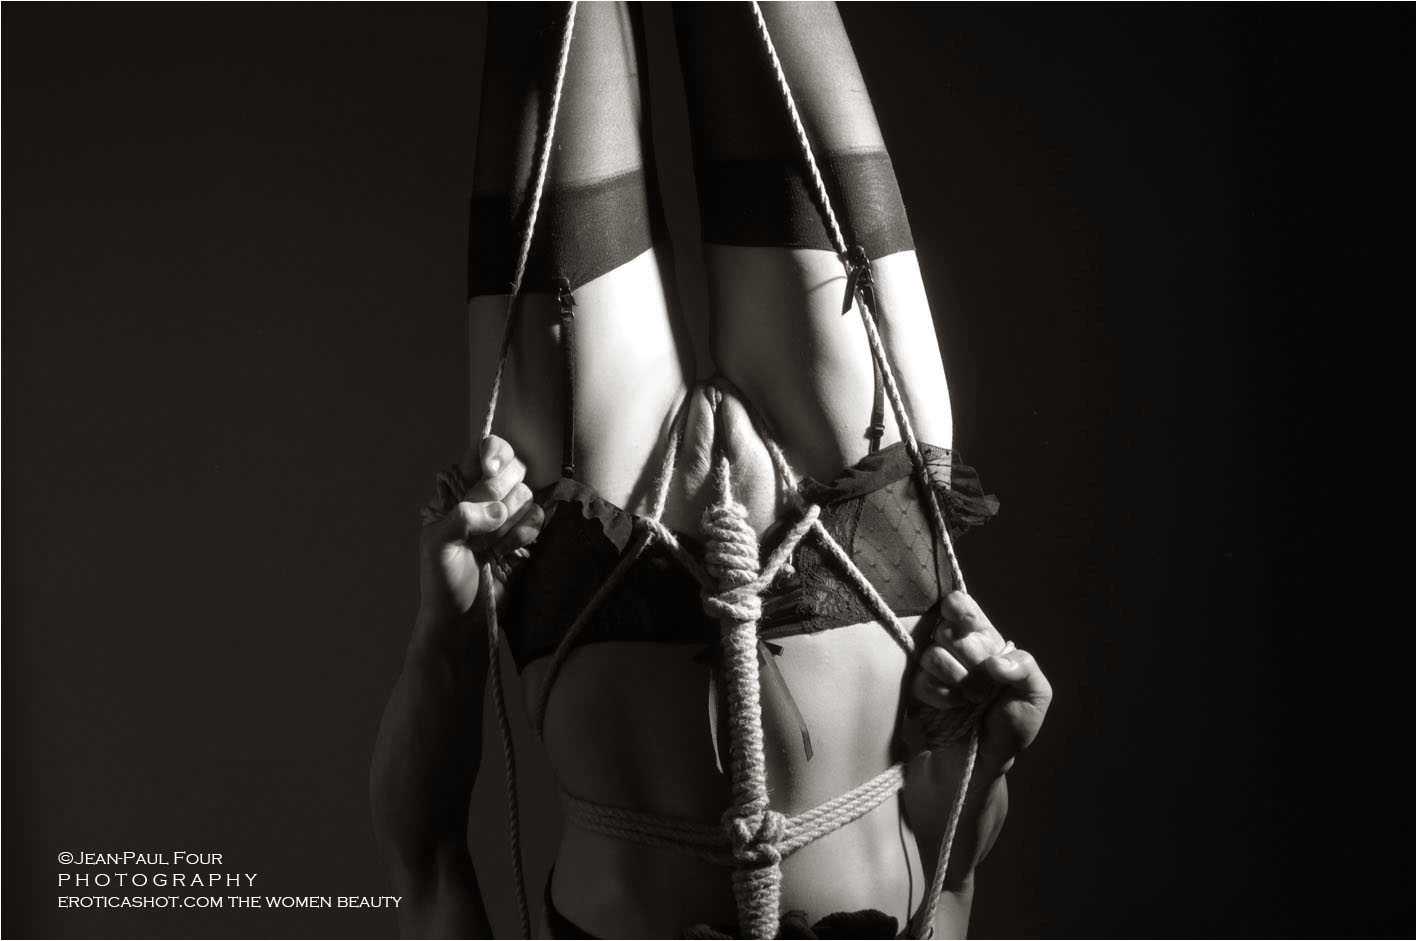 Yaka, extreme slut, bondage, shibari, suspension, rosebud XXL, anal fucking, anal fist, pussy fisting, up side down pee, wax games, candle in the ass, follow on eroticashot.com, pict by ©Jean-Paul Four